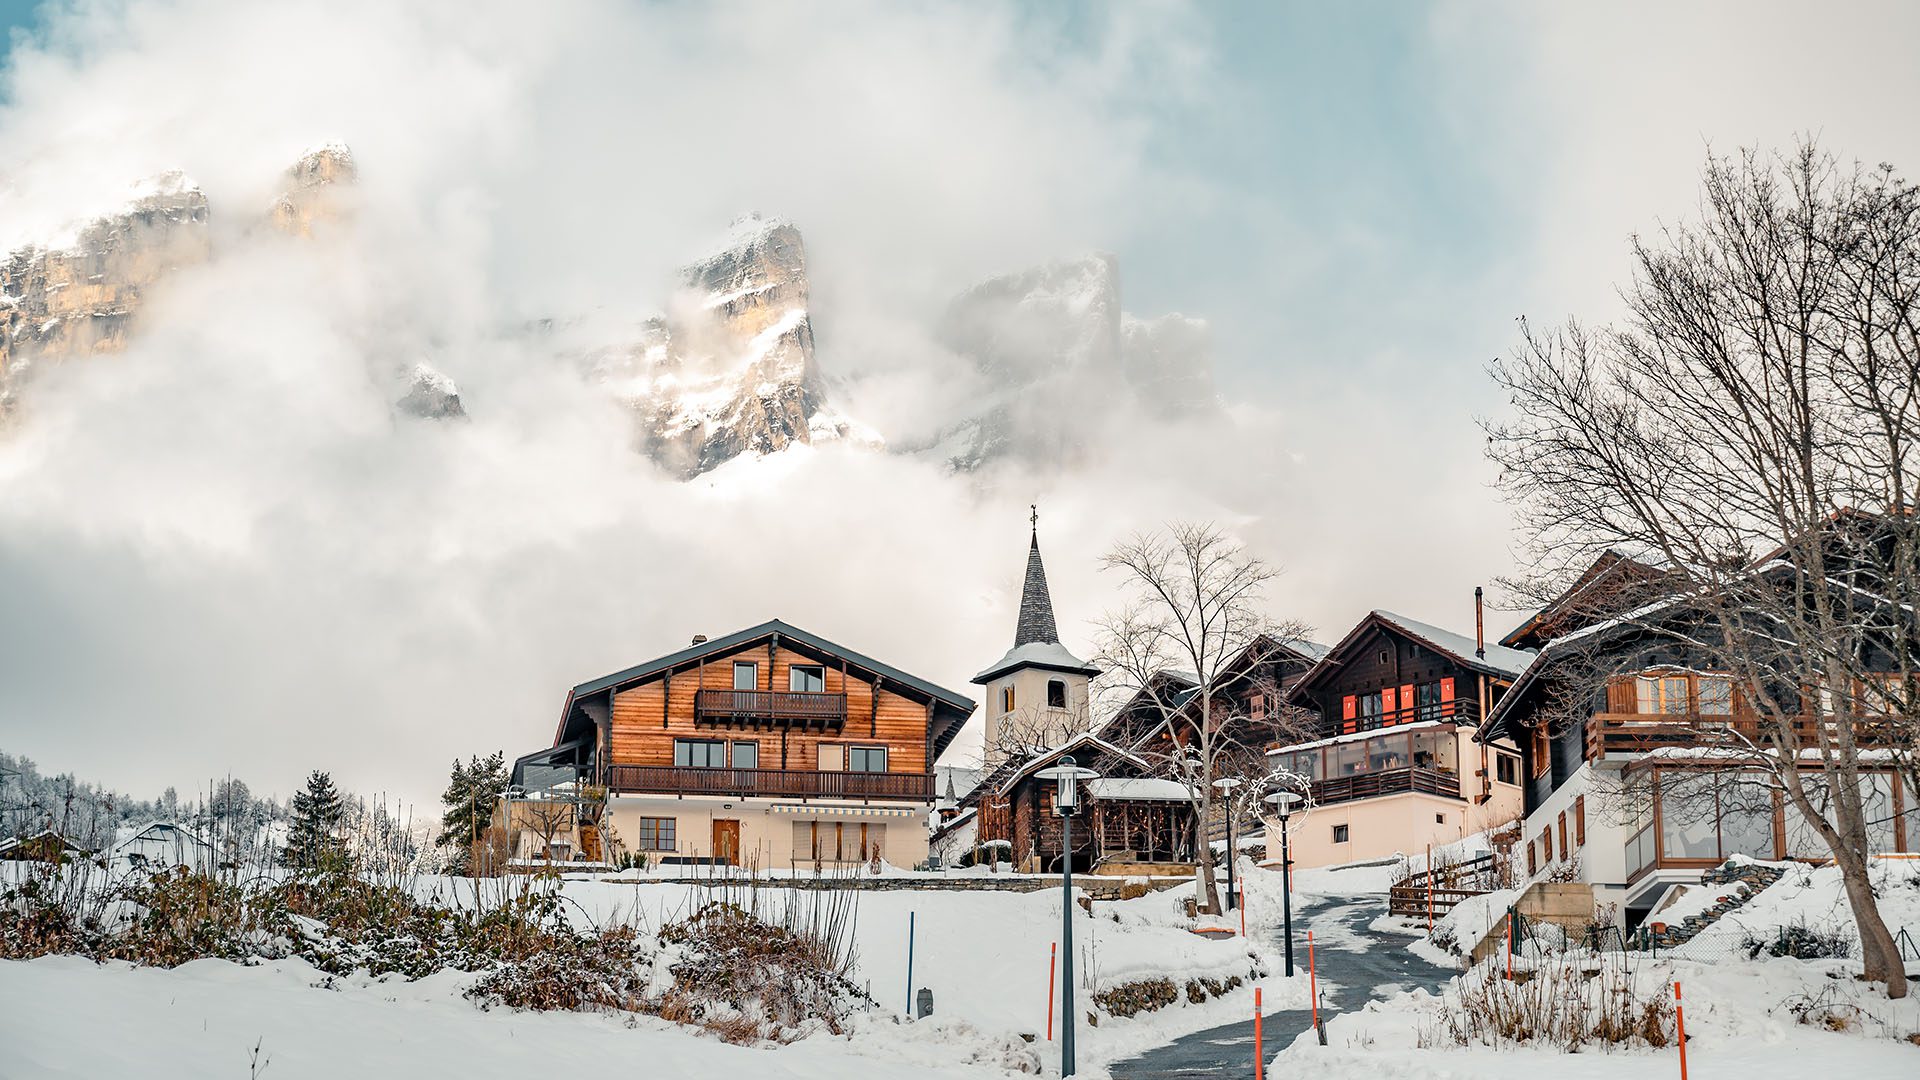 The dramatic landscape of the alpine village of Leukerbad, image by MyLeukerbadAG